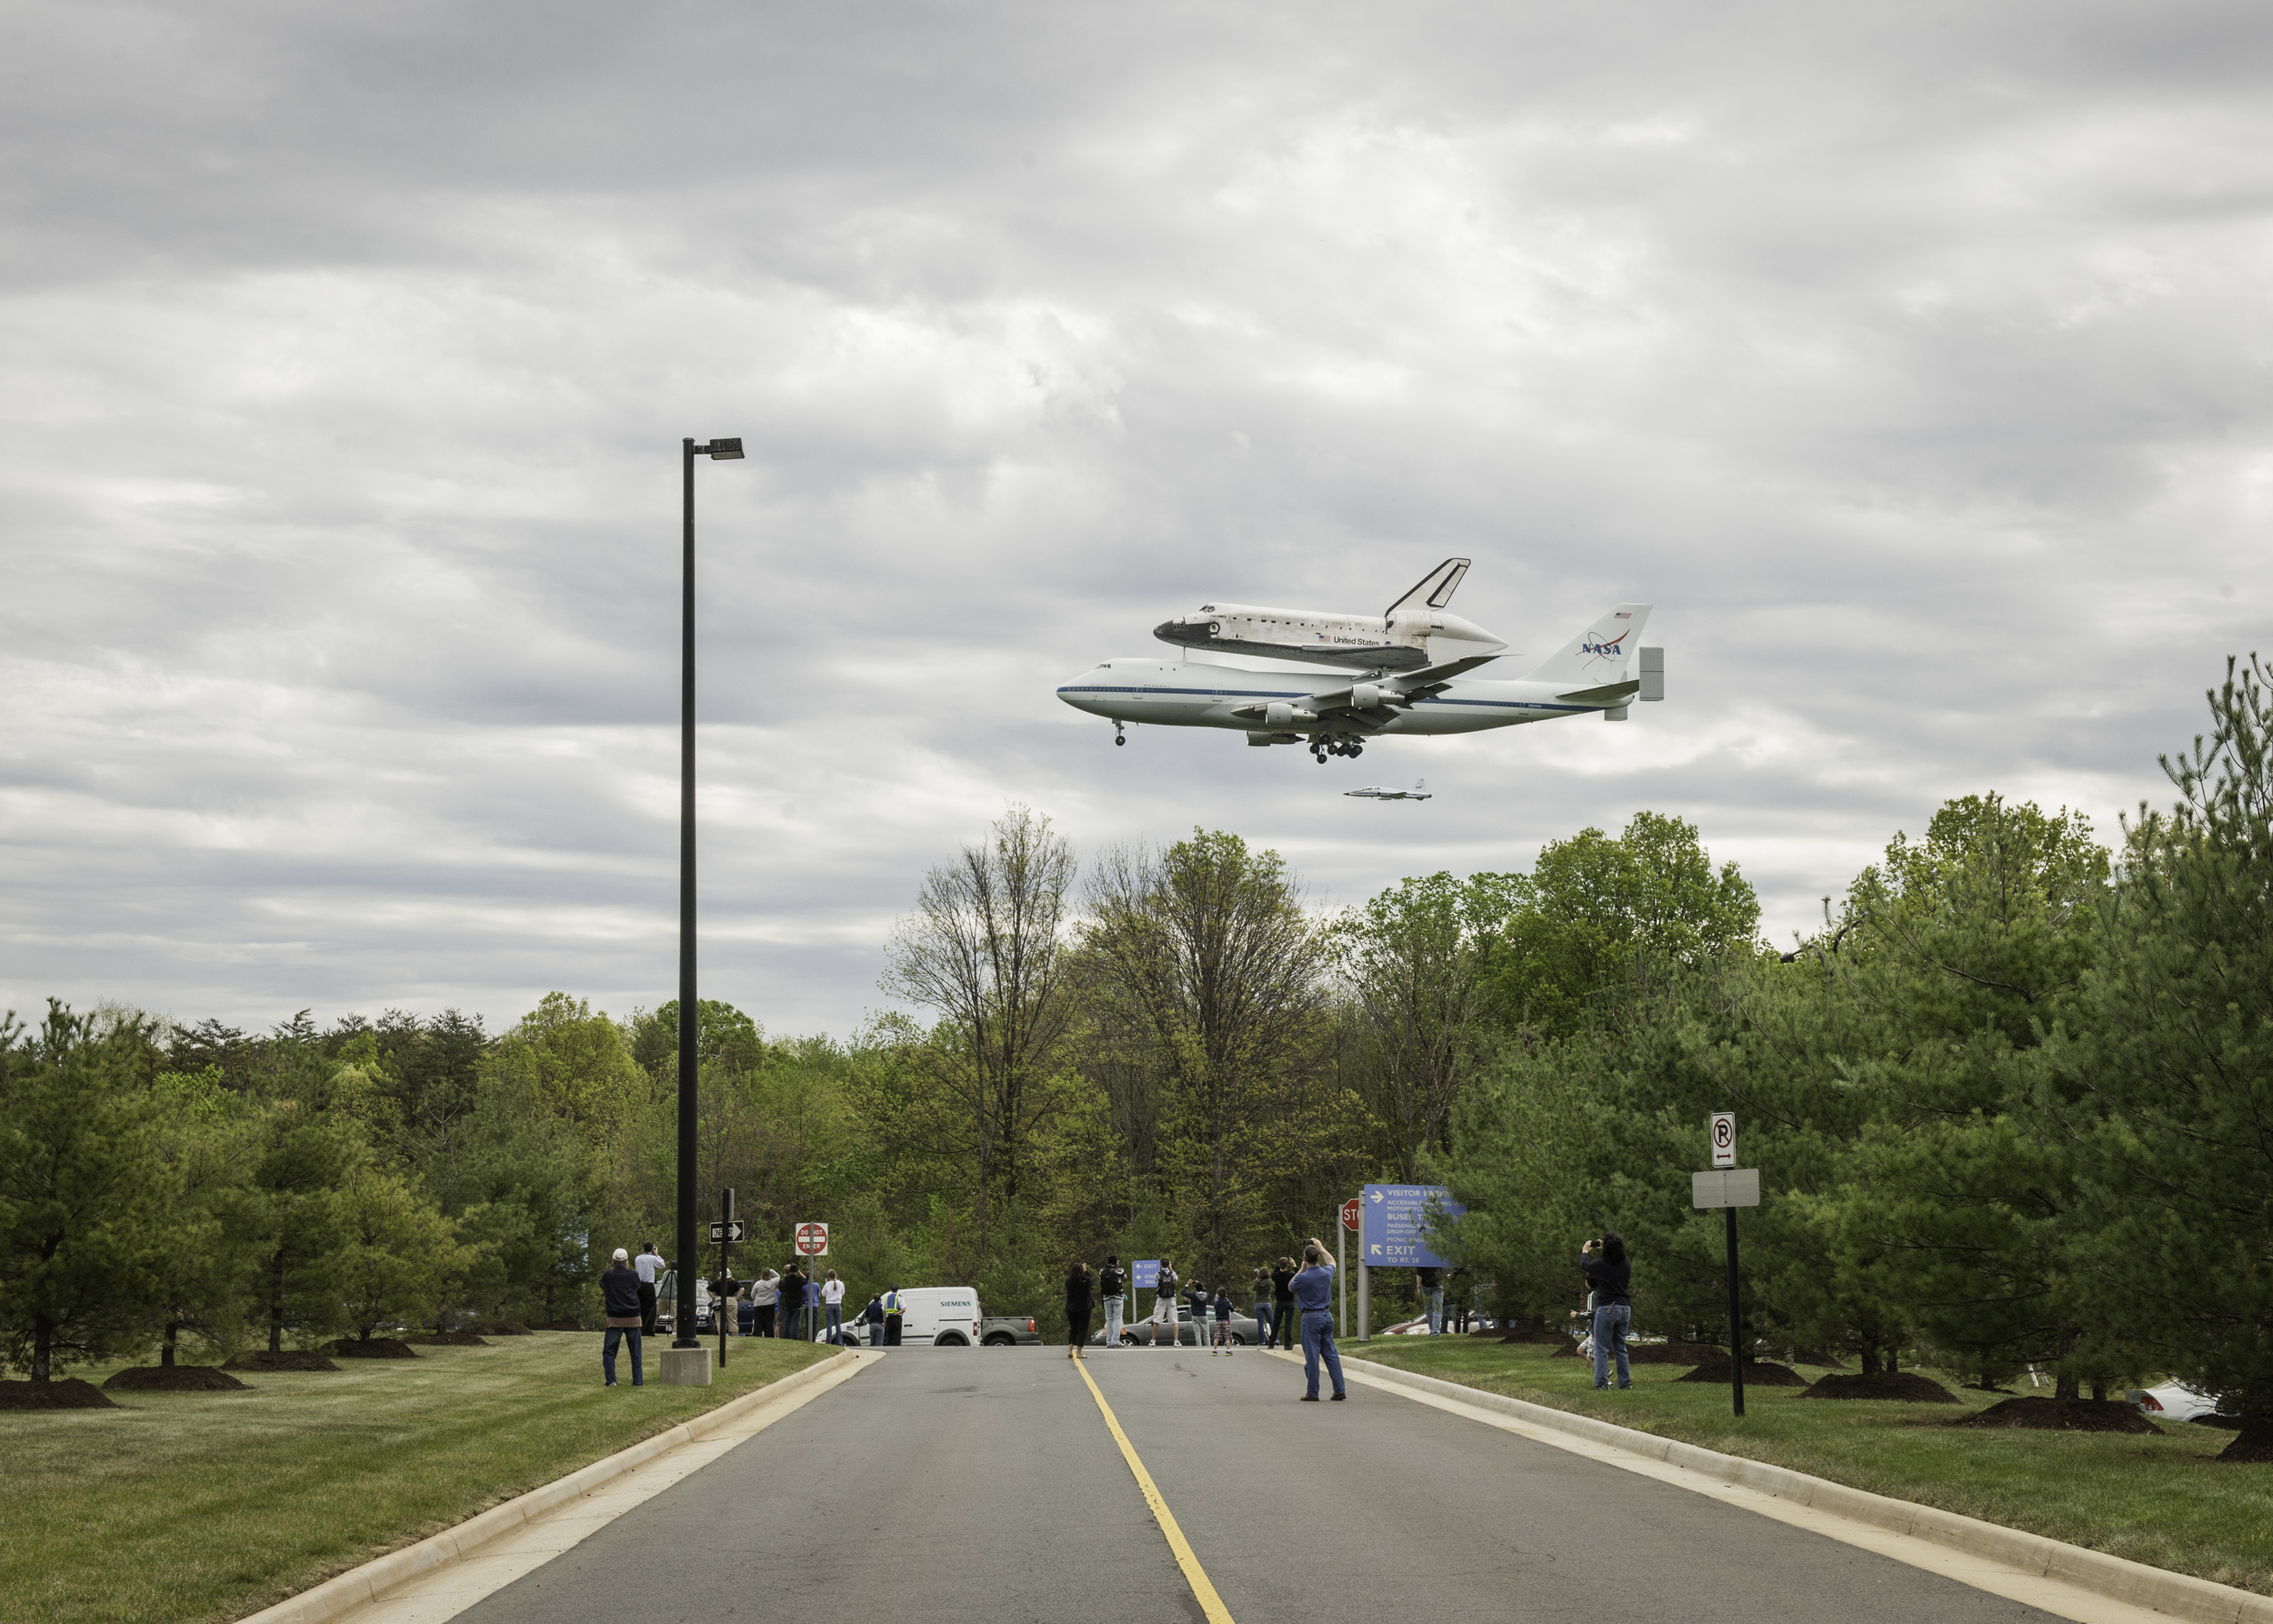  Space shuttle Discovery, mounted atop a NASA 747 Shuttle Carrier Aircraft (SCA), flies over the National Air and Space Museum’s Steven F. Udvar-Hazy Center, Tuesday, April 17, 2012, in Chantilly, Va. Discovery, the first orbiter retired from NASA’s 